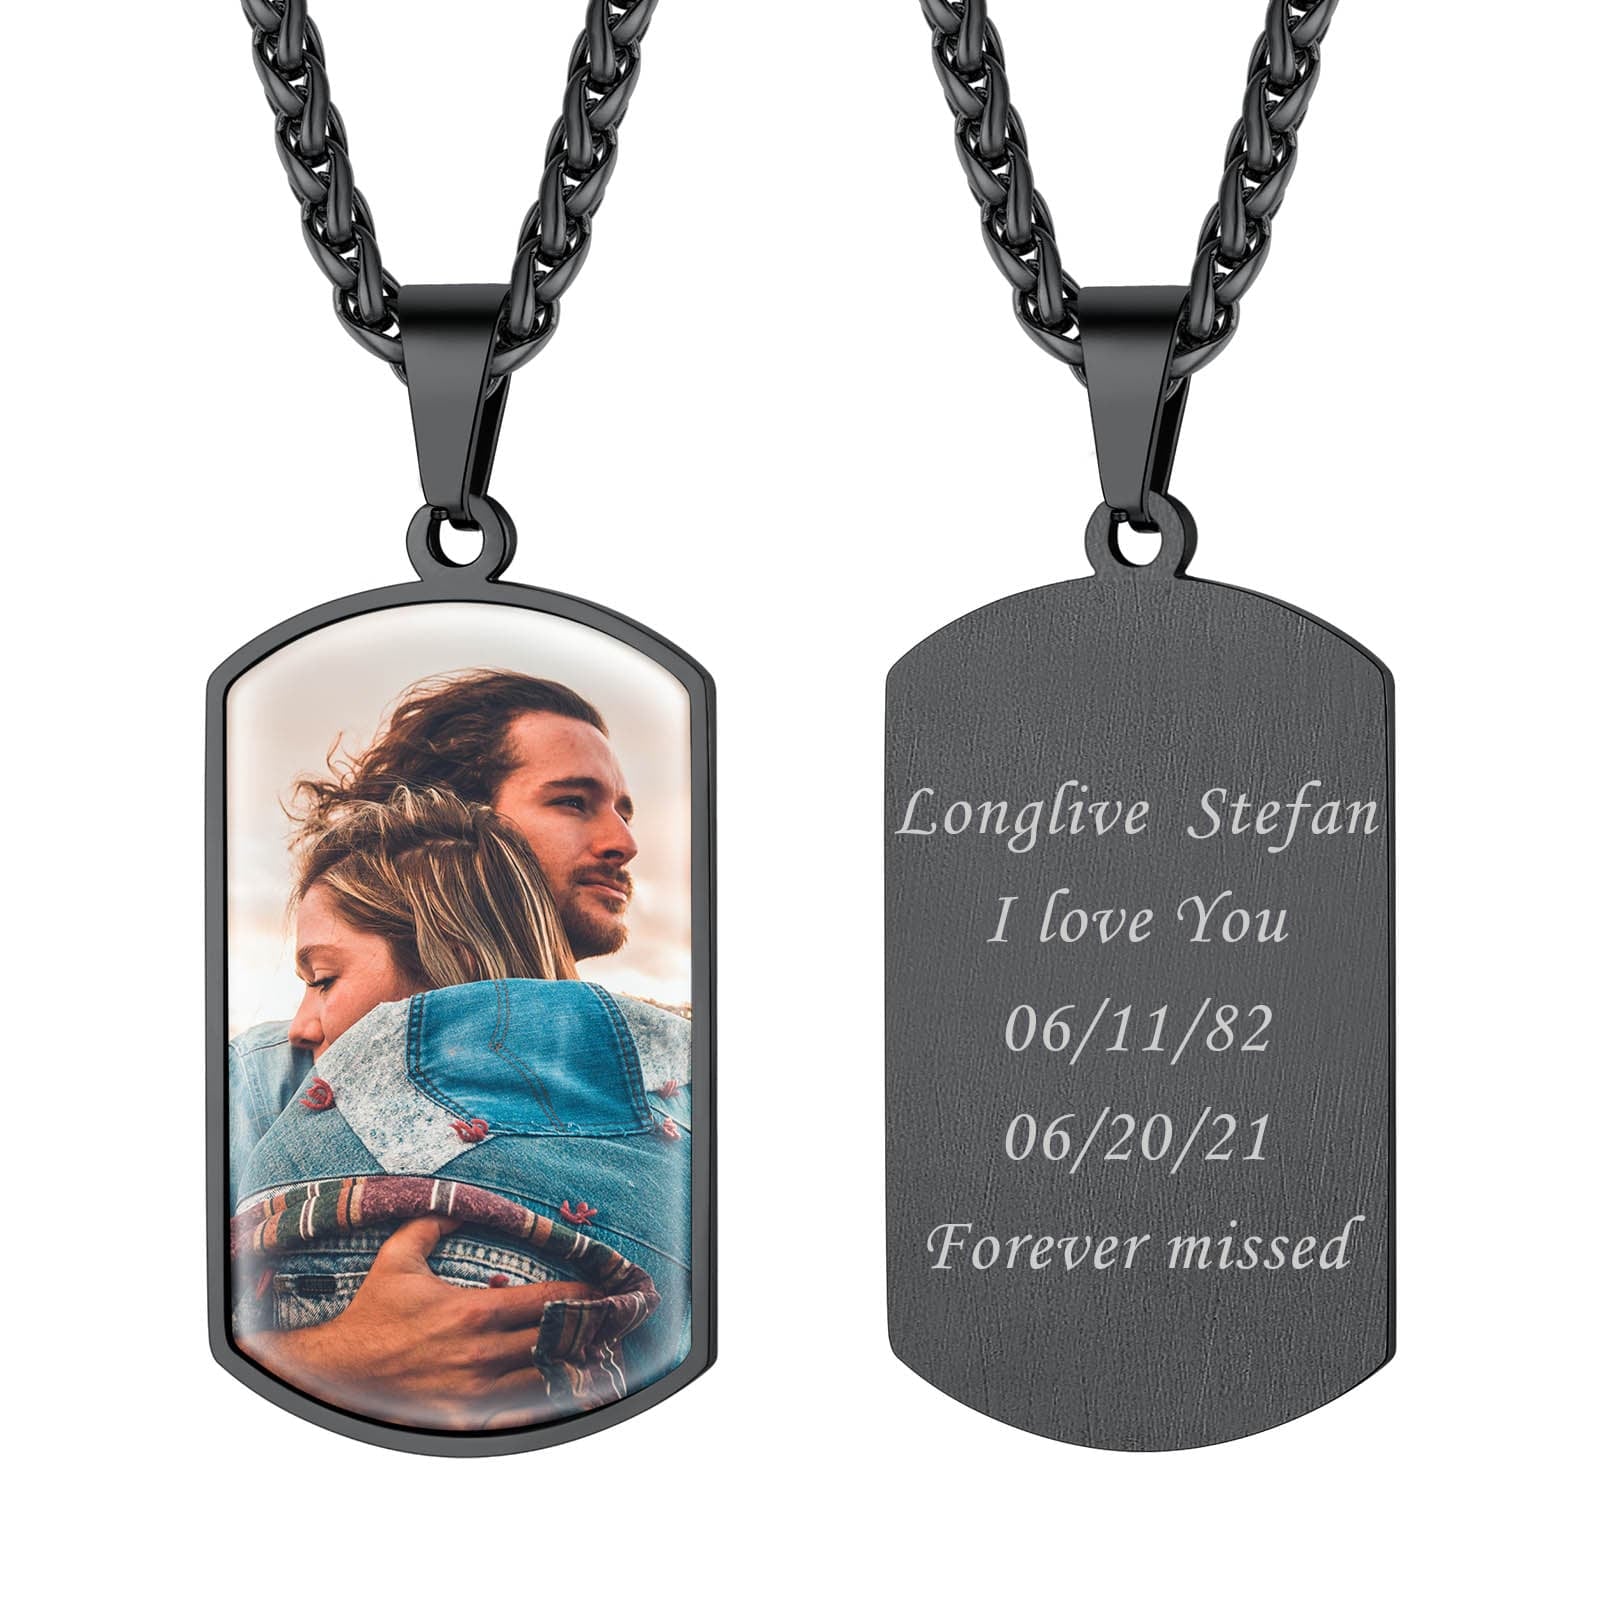 Customized Dog Tag Picture Necklaces for Men Woment Black